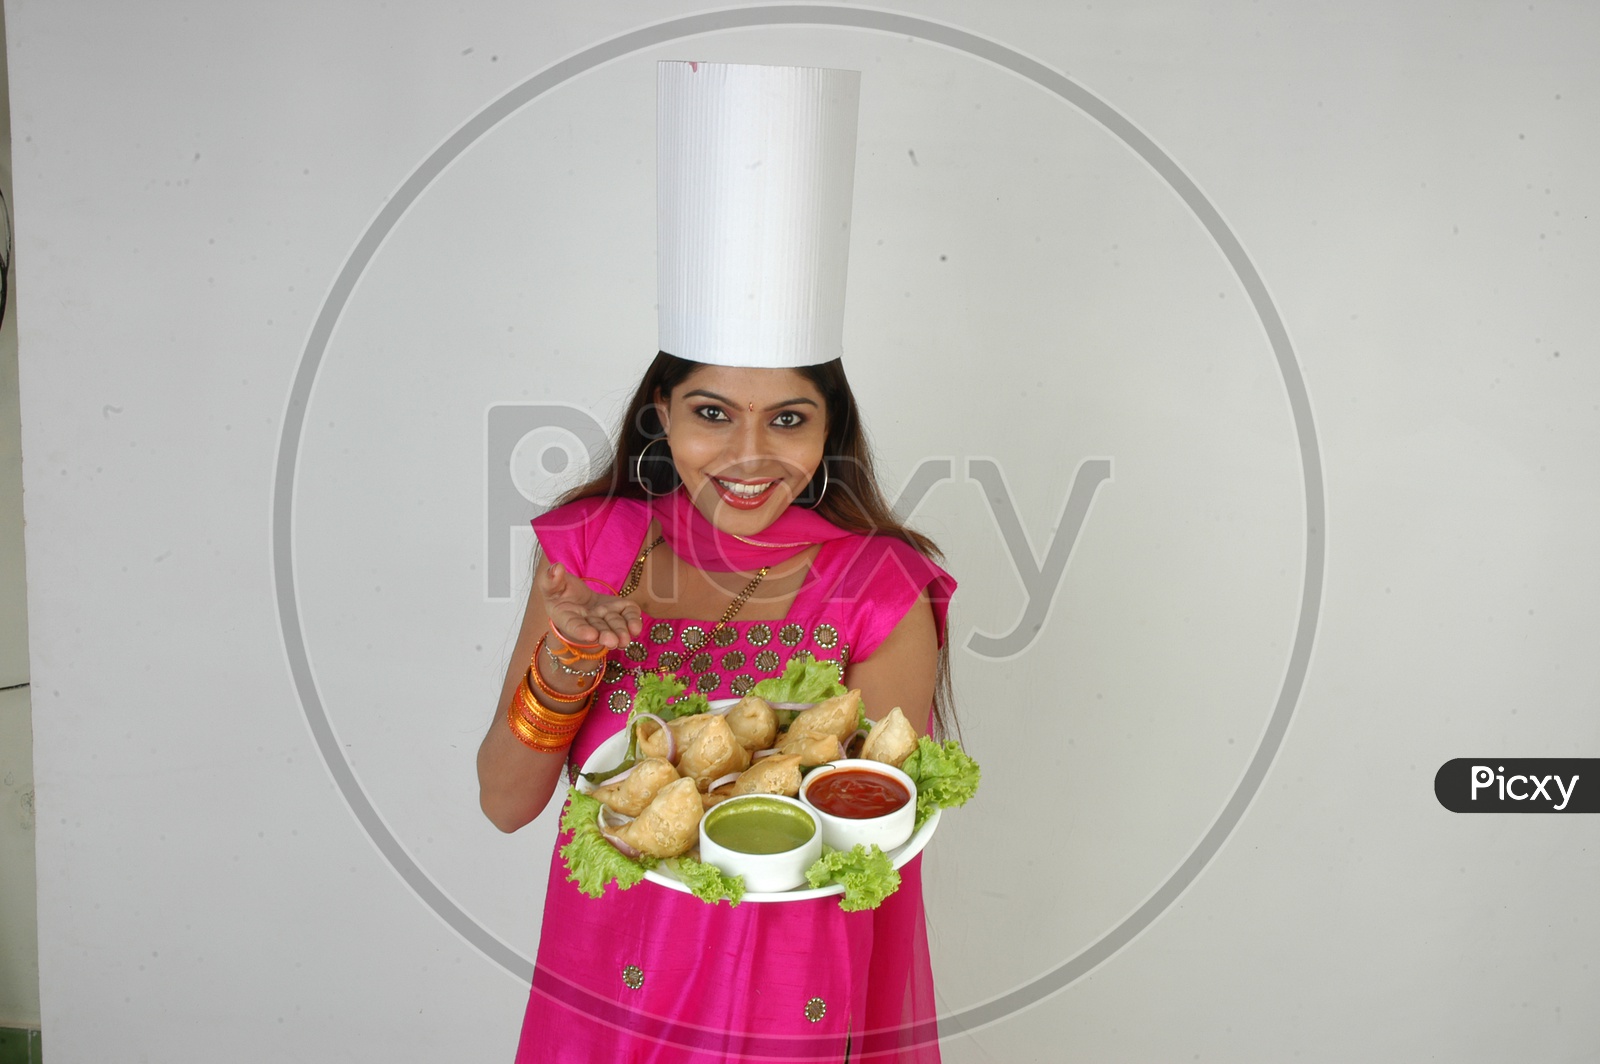 An Indian Woman  Chef  In Kitchen Apron And Cap Holding Samosas Plate With an Expression on an Isolated White Background